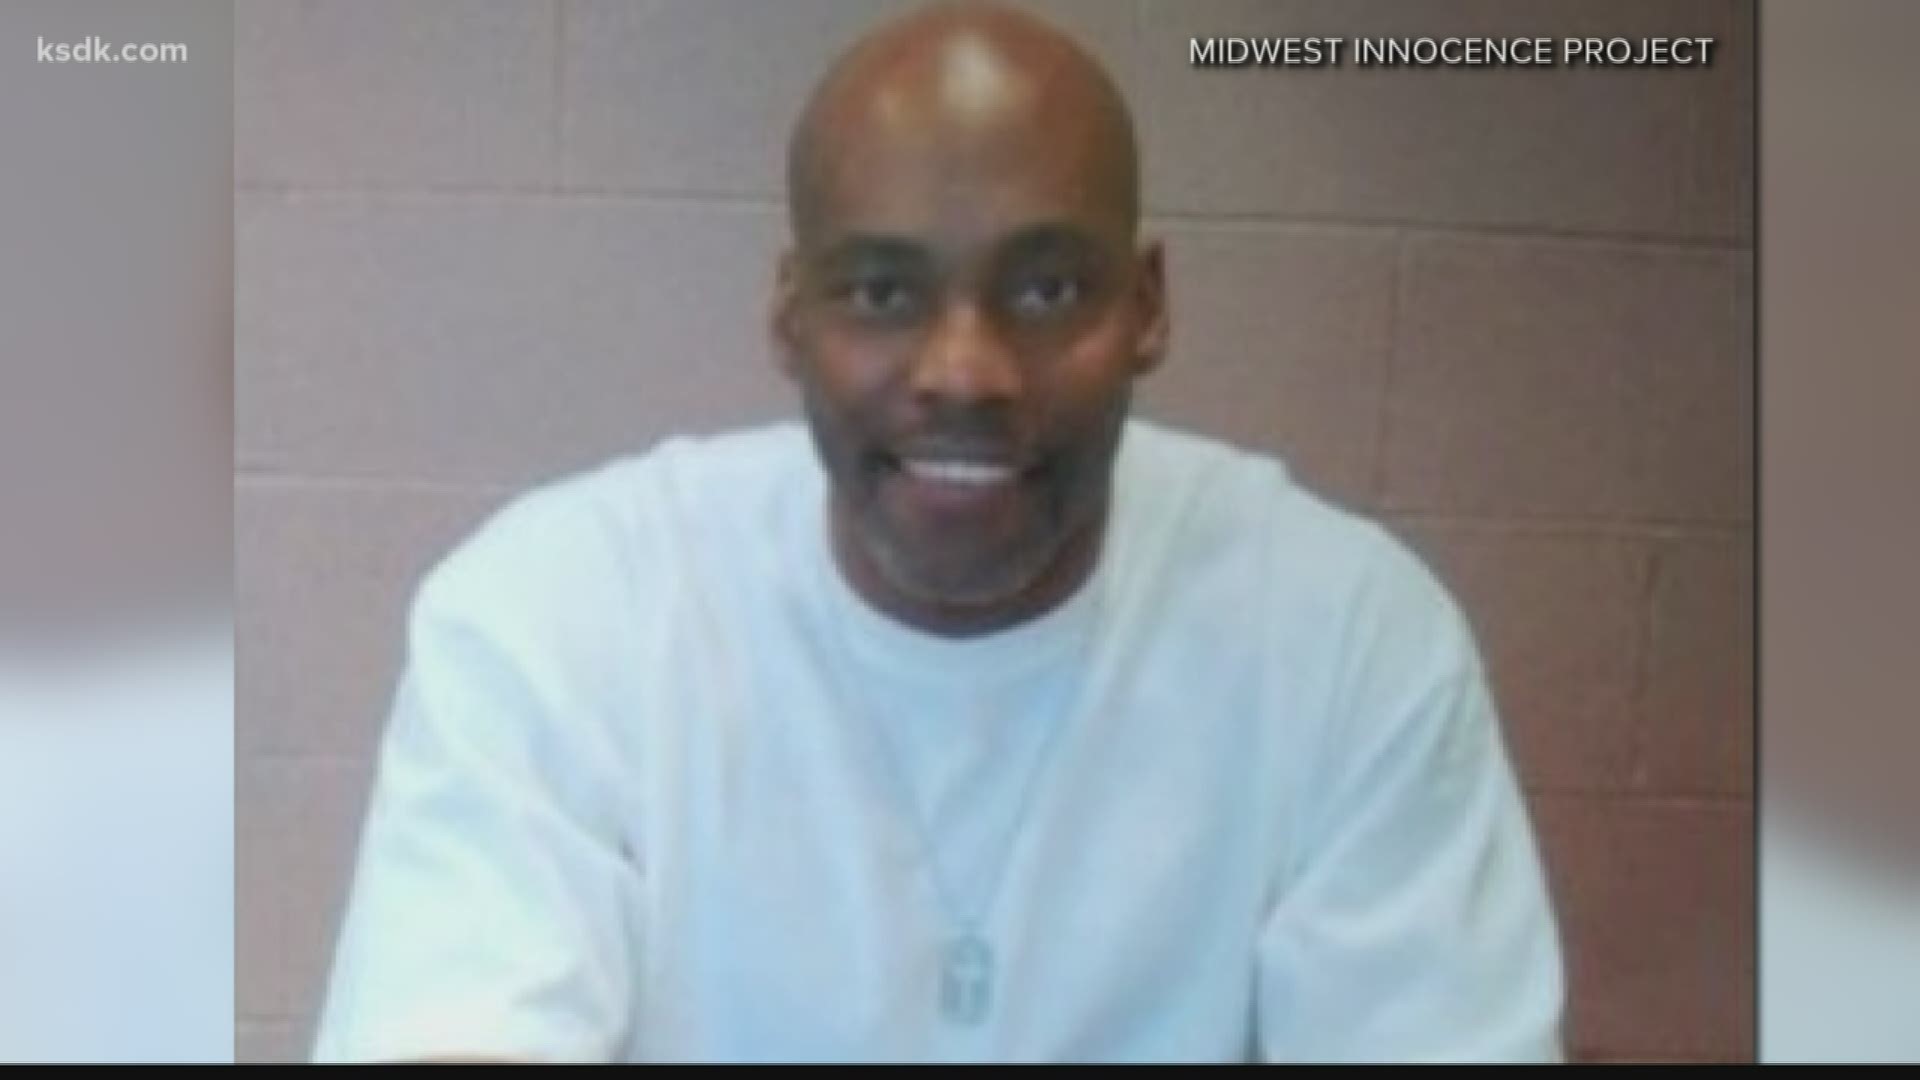 Lamar Johnson is serving a life sentence for a 1994 murder that left a man dead during a drug deal in St. Louis.